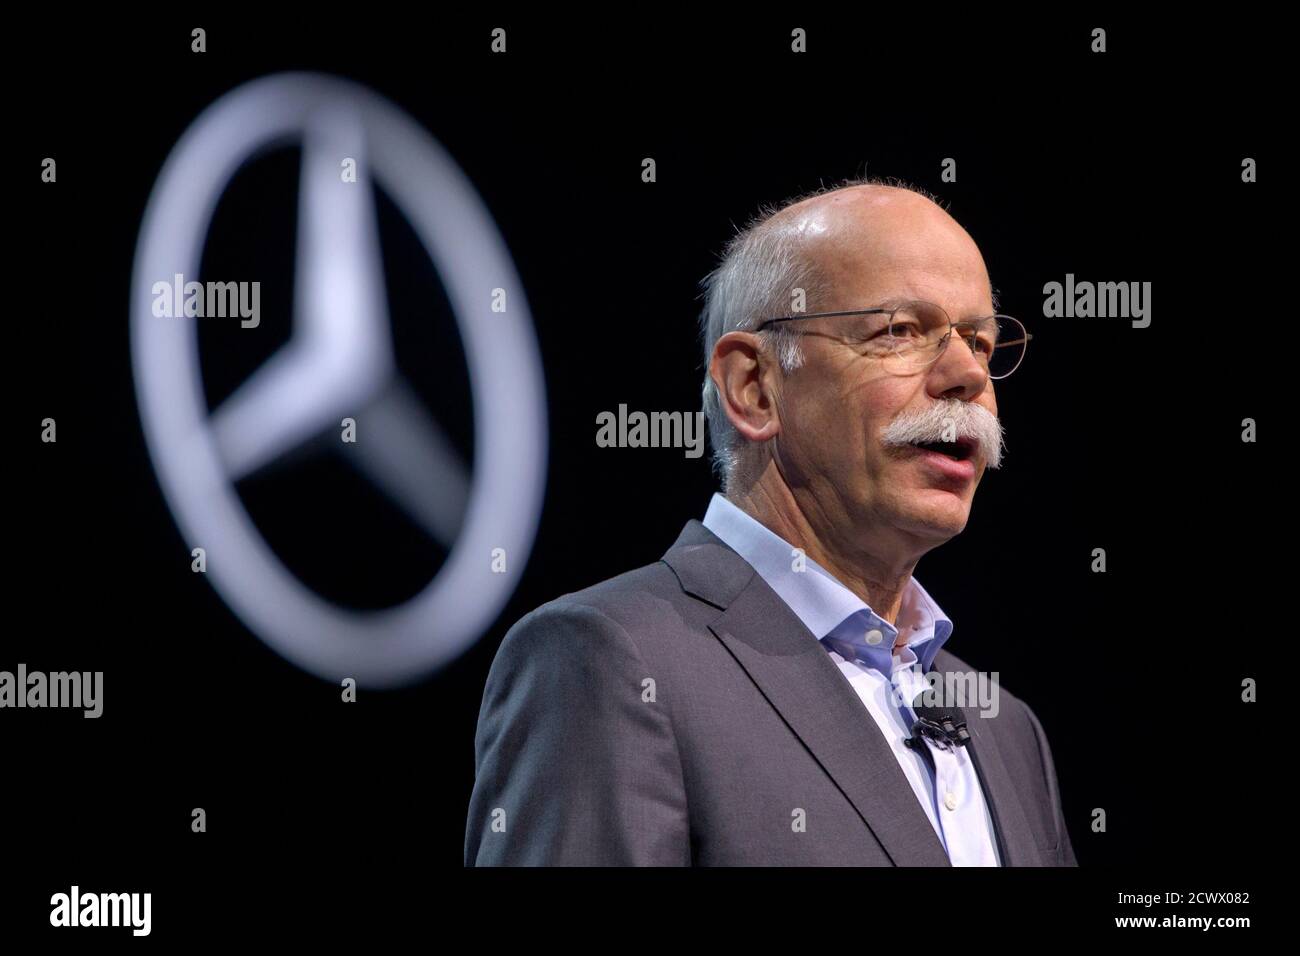 Dieter Zetsche, head of Mercedes-Benz cars, speaks in a keynote address during the 2015 International Consumer Electronics Show (CES) in Las Vegas, Nevada January 5, 2015. Germany's Daimler AG wants to reset consumers' expectations about self-driving cars with its futuristic Mercedes-Benz F 015 concept, unveiled Monday evening at the annual Consumer Electronics Show in Las Vegas. REUTERS/Steve Marcus (UNITED STATES - Tags: SCIENCE TECHNOLOGY BUSINESS TRANSPORT) Stock Photo